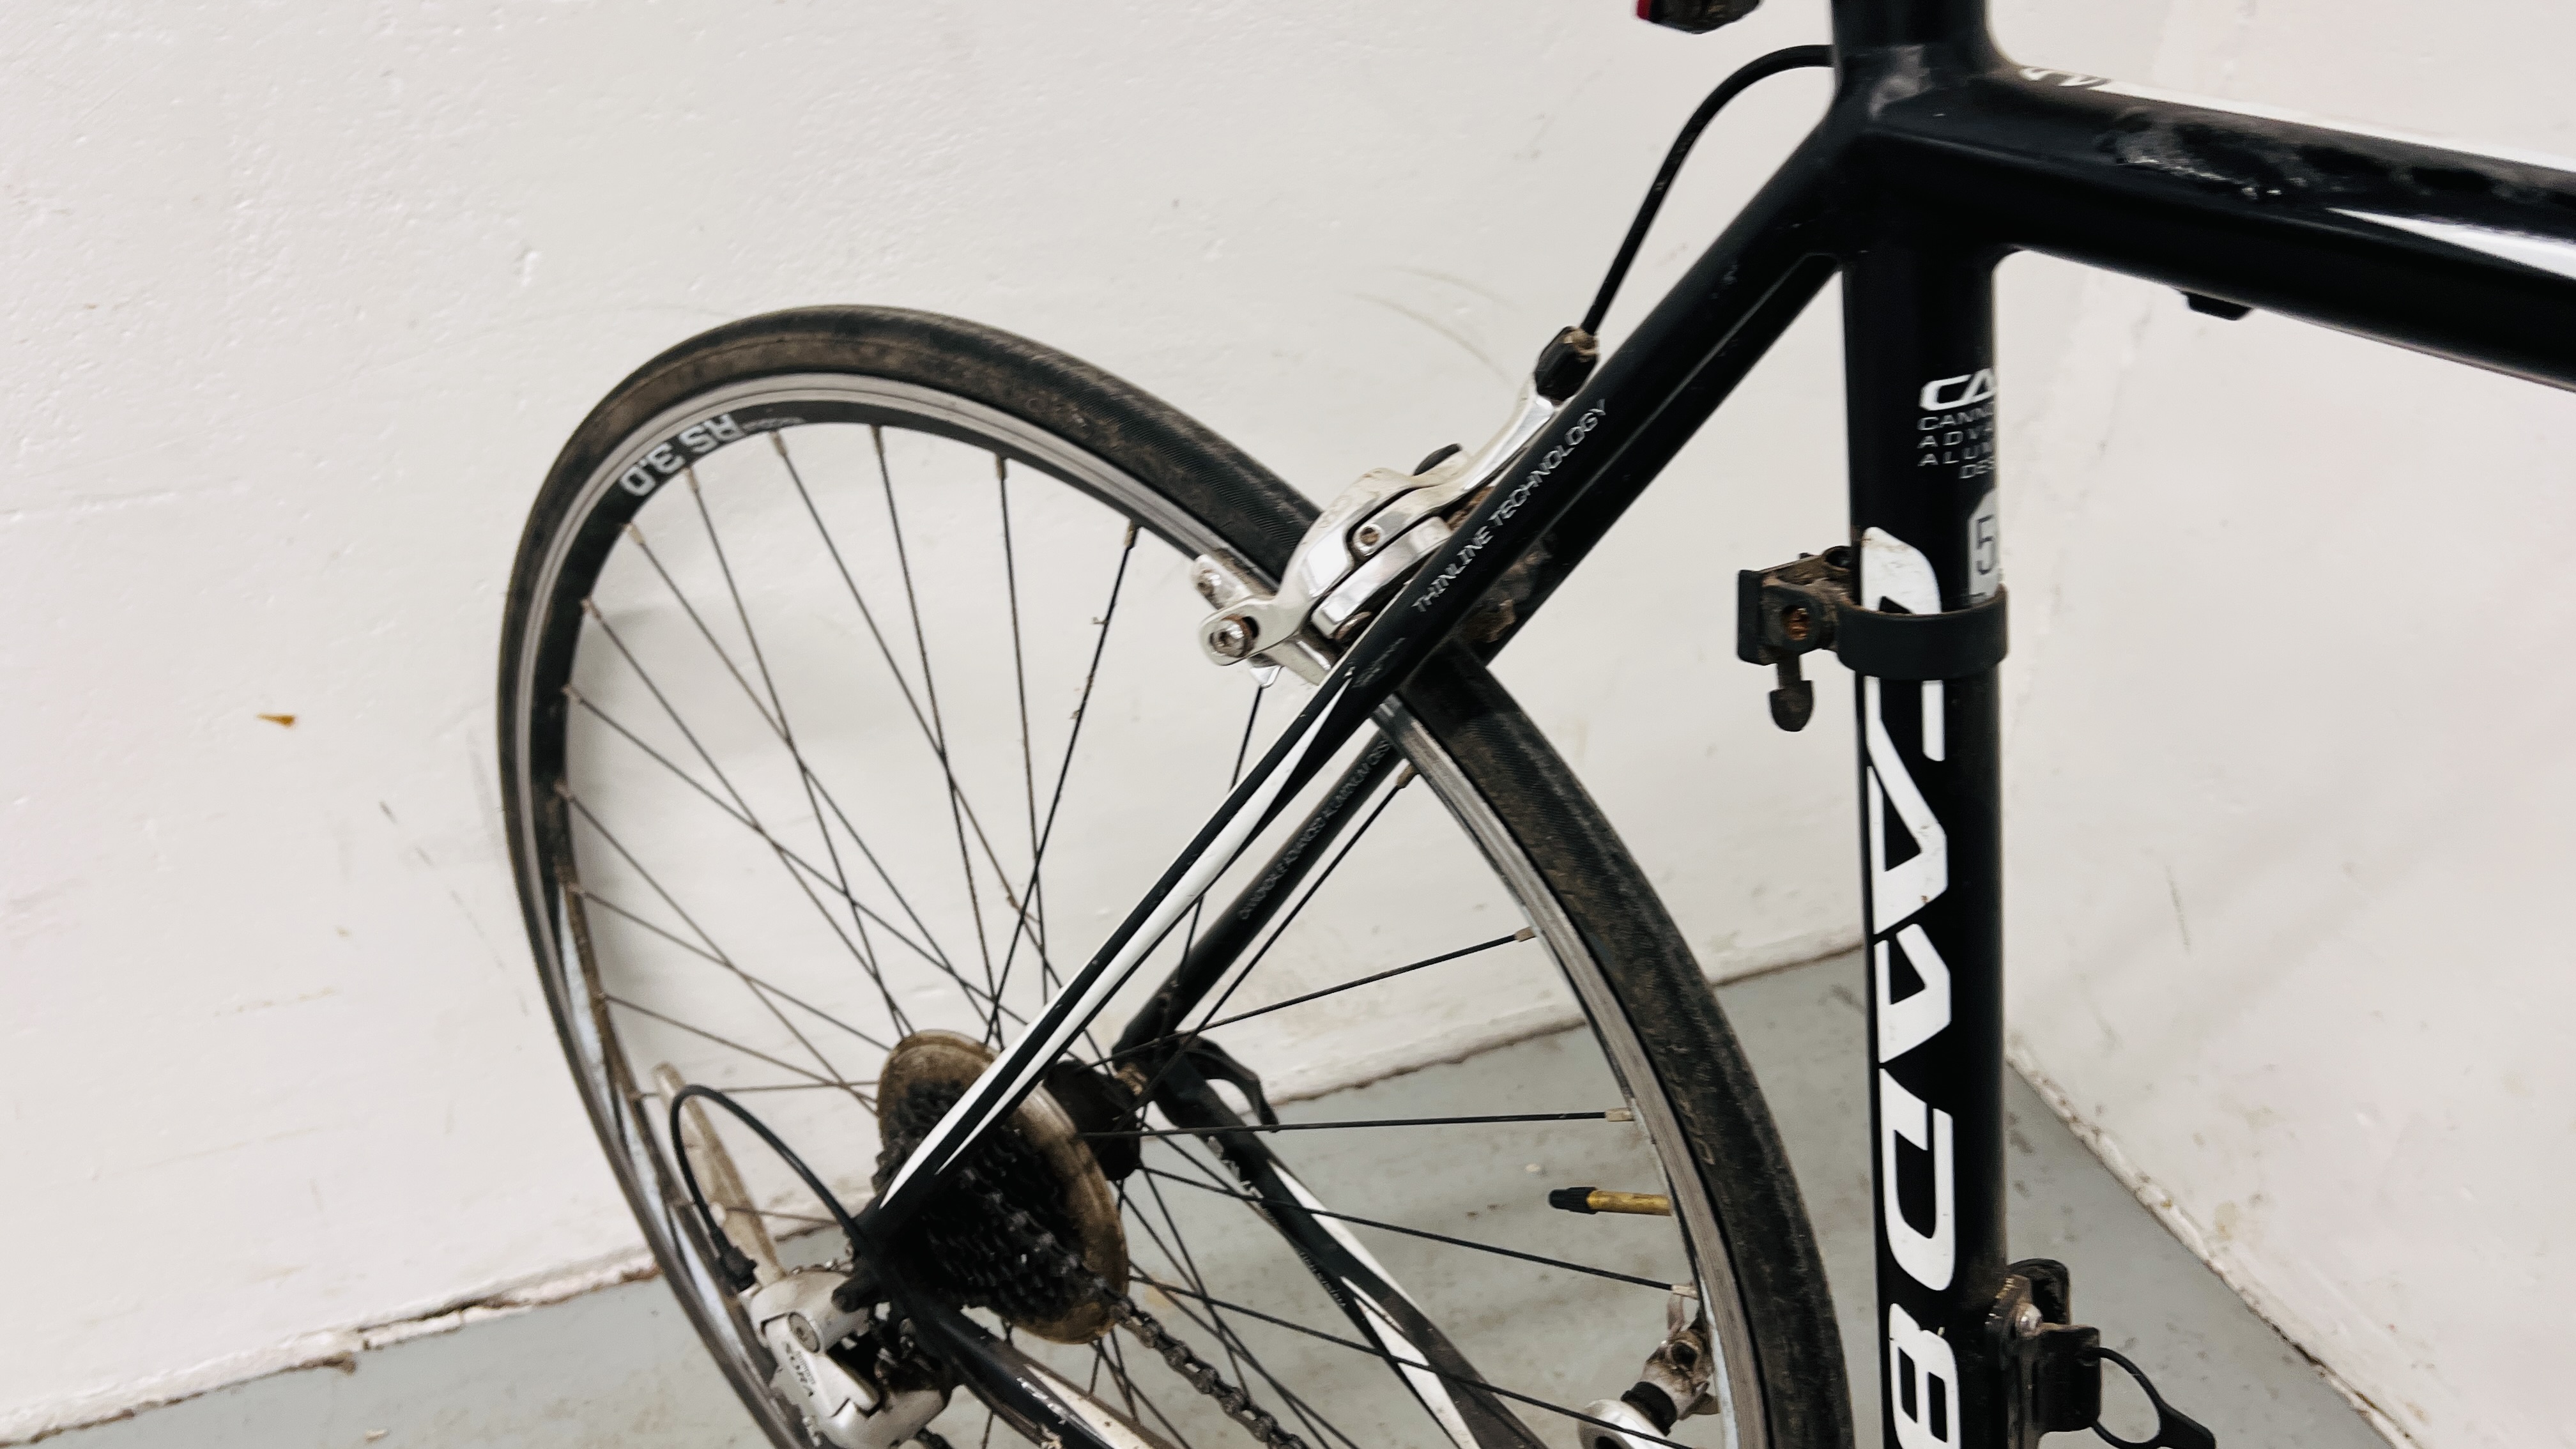 A GENTS CANNONDALE CAAD 8 RACING BIKE. - Image 9 of 11